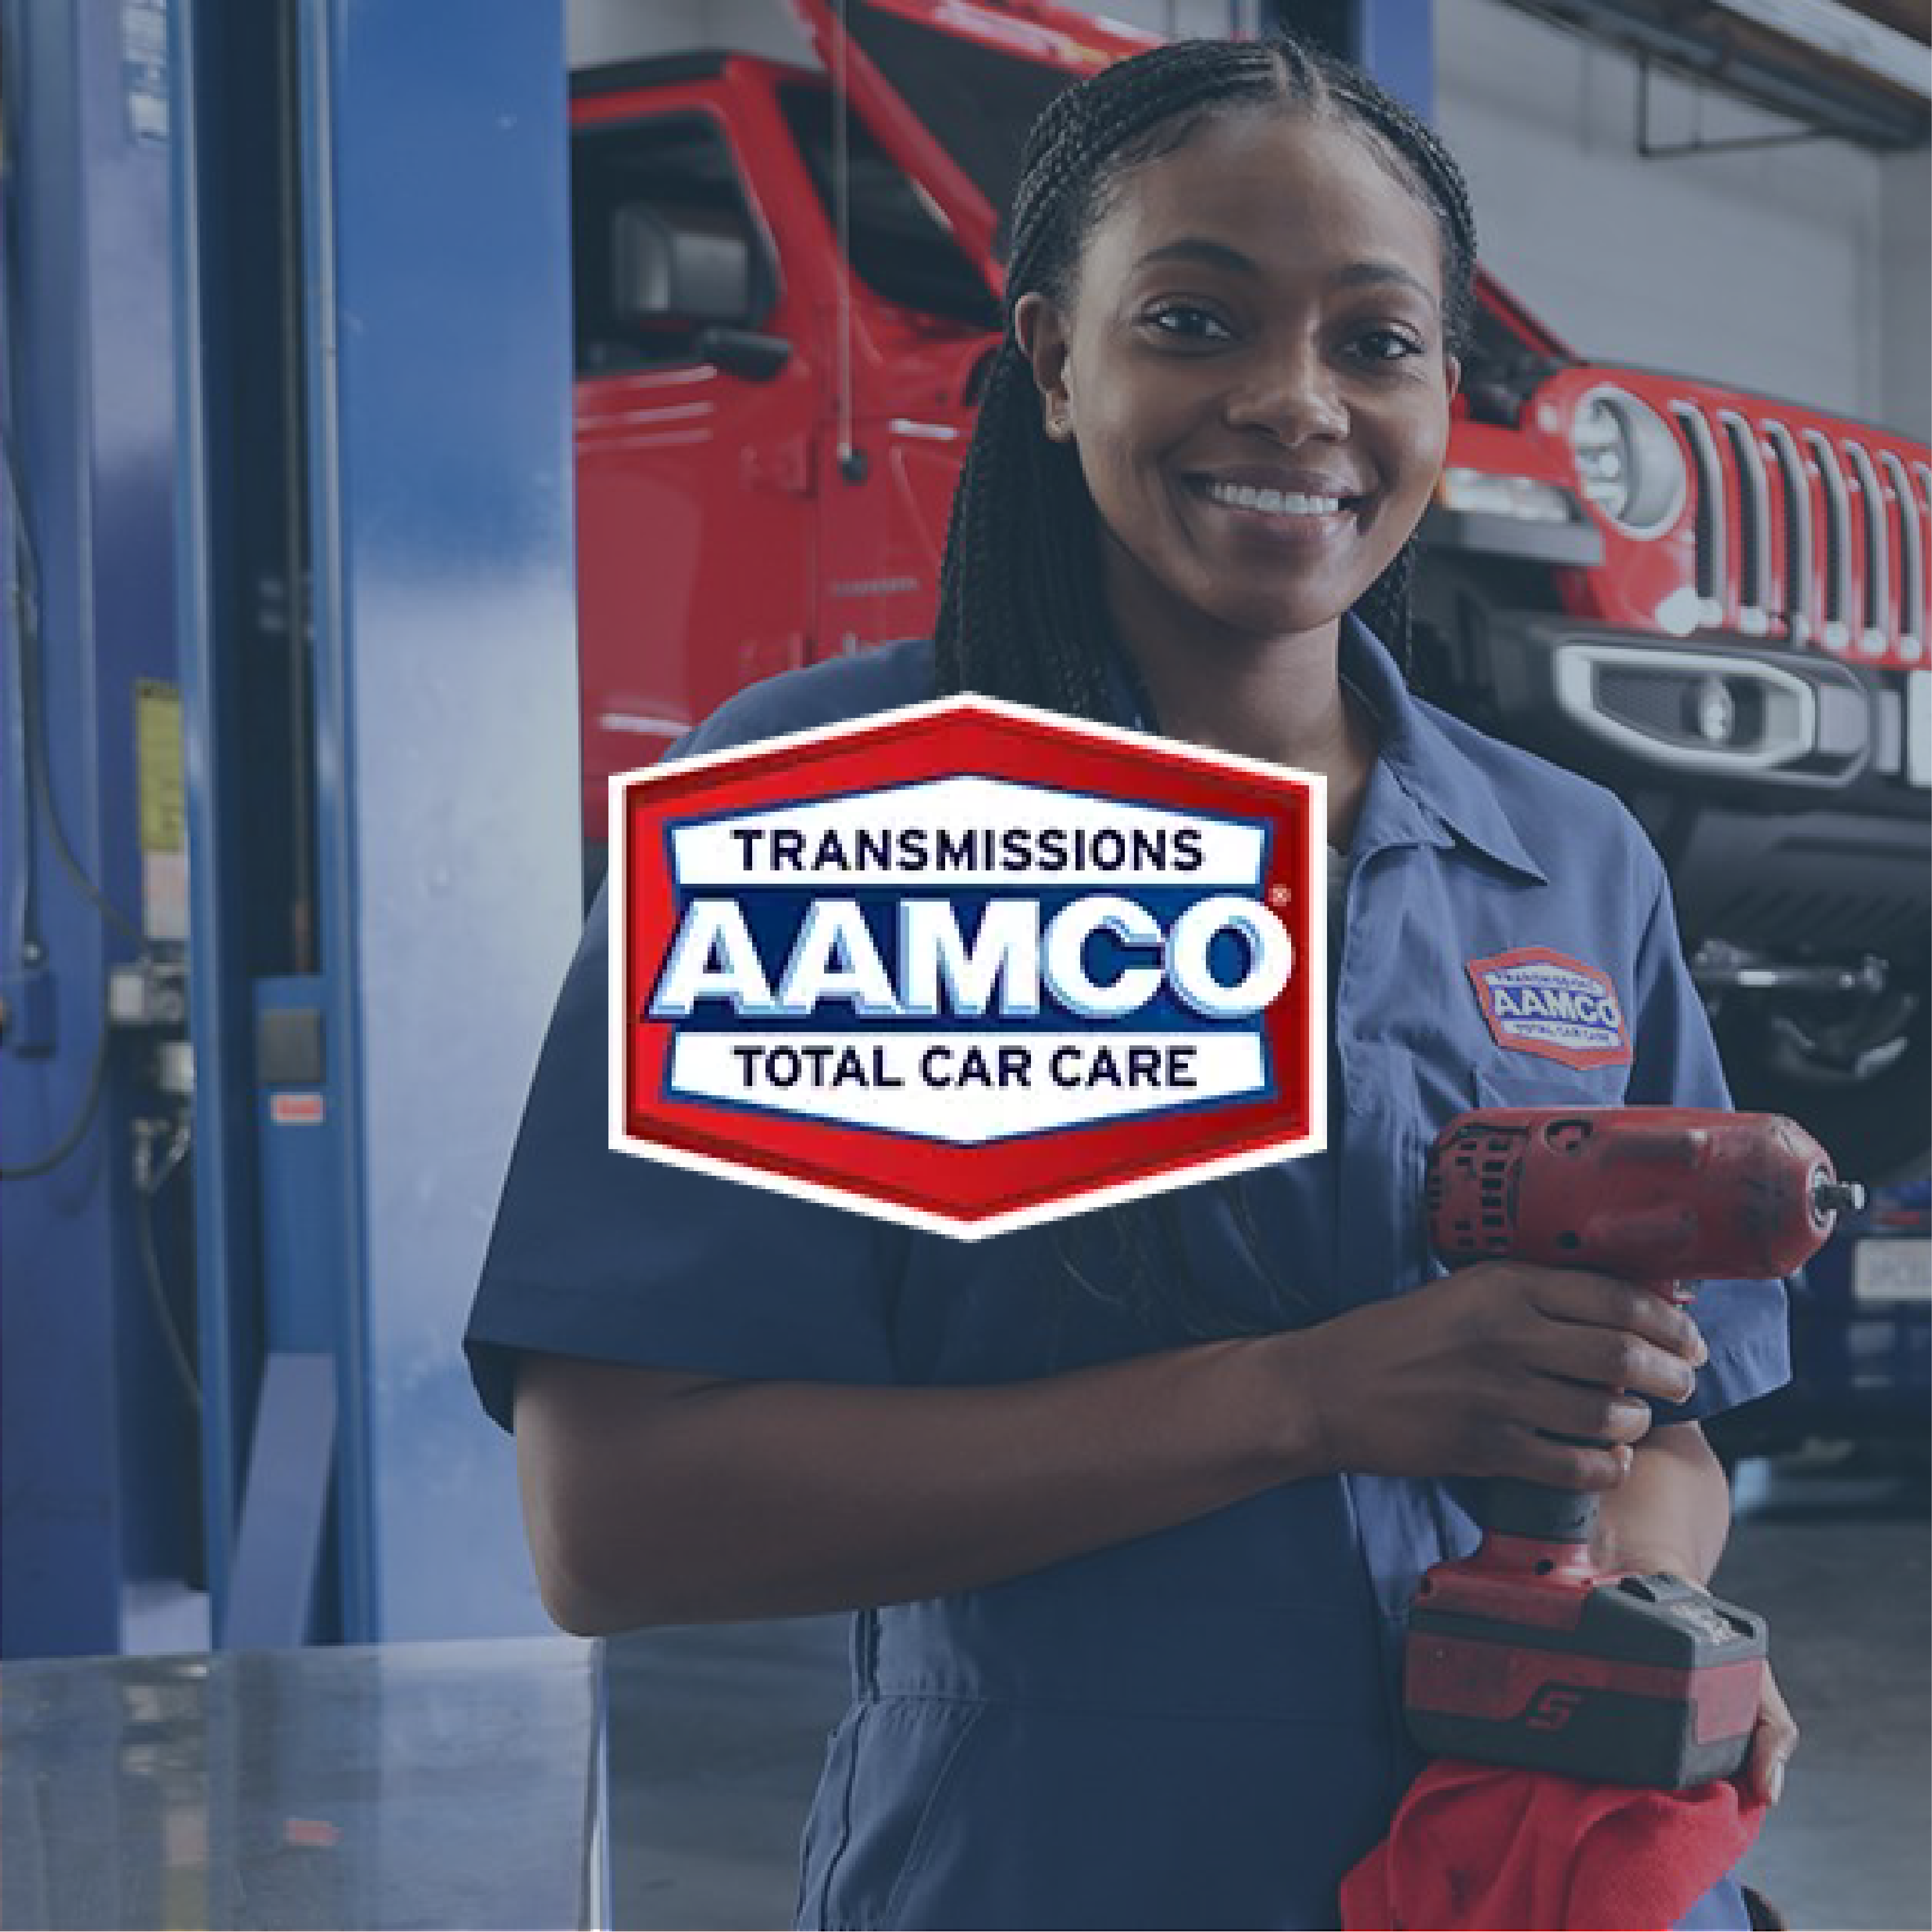 AAMCO Case Study